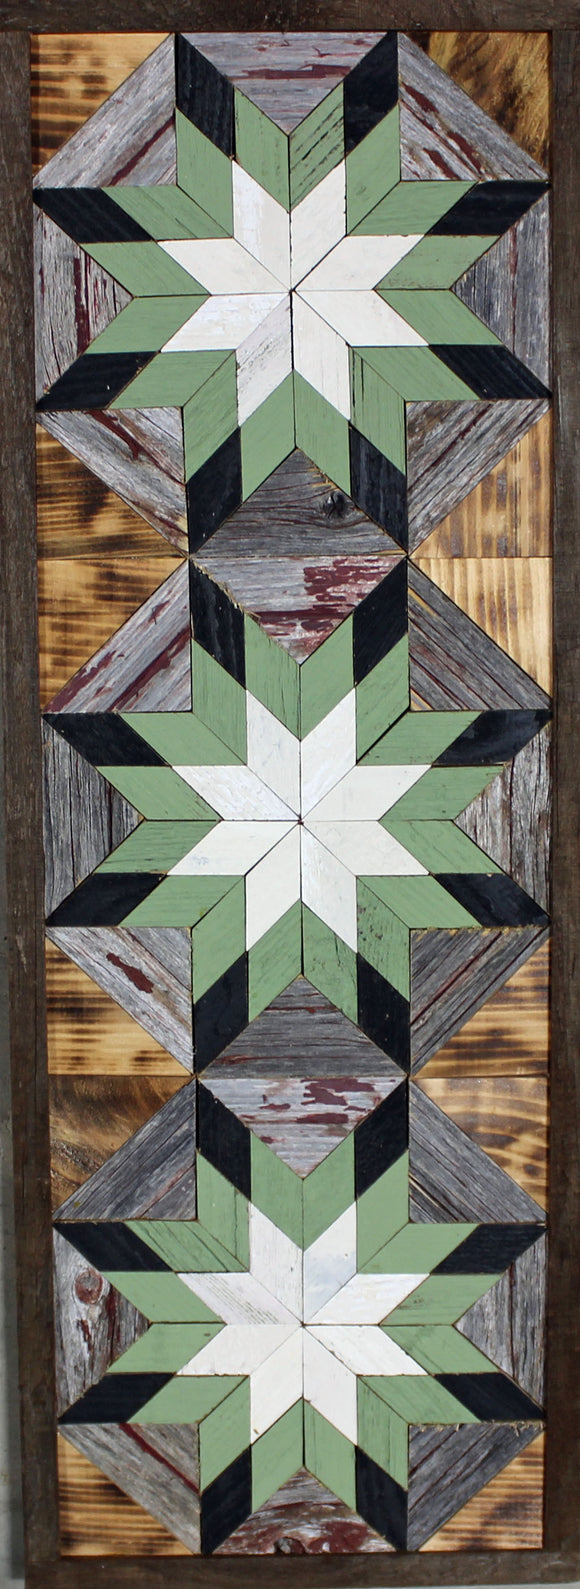 Amish Barn Quilt Wall Art, 30 by 10.5 Sage green and black stars